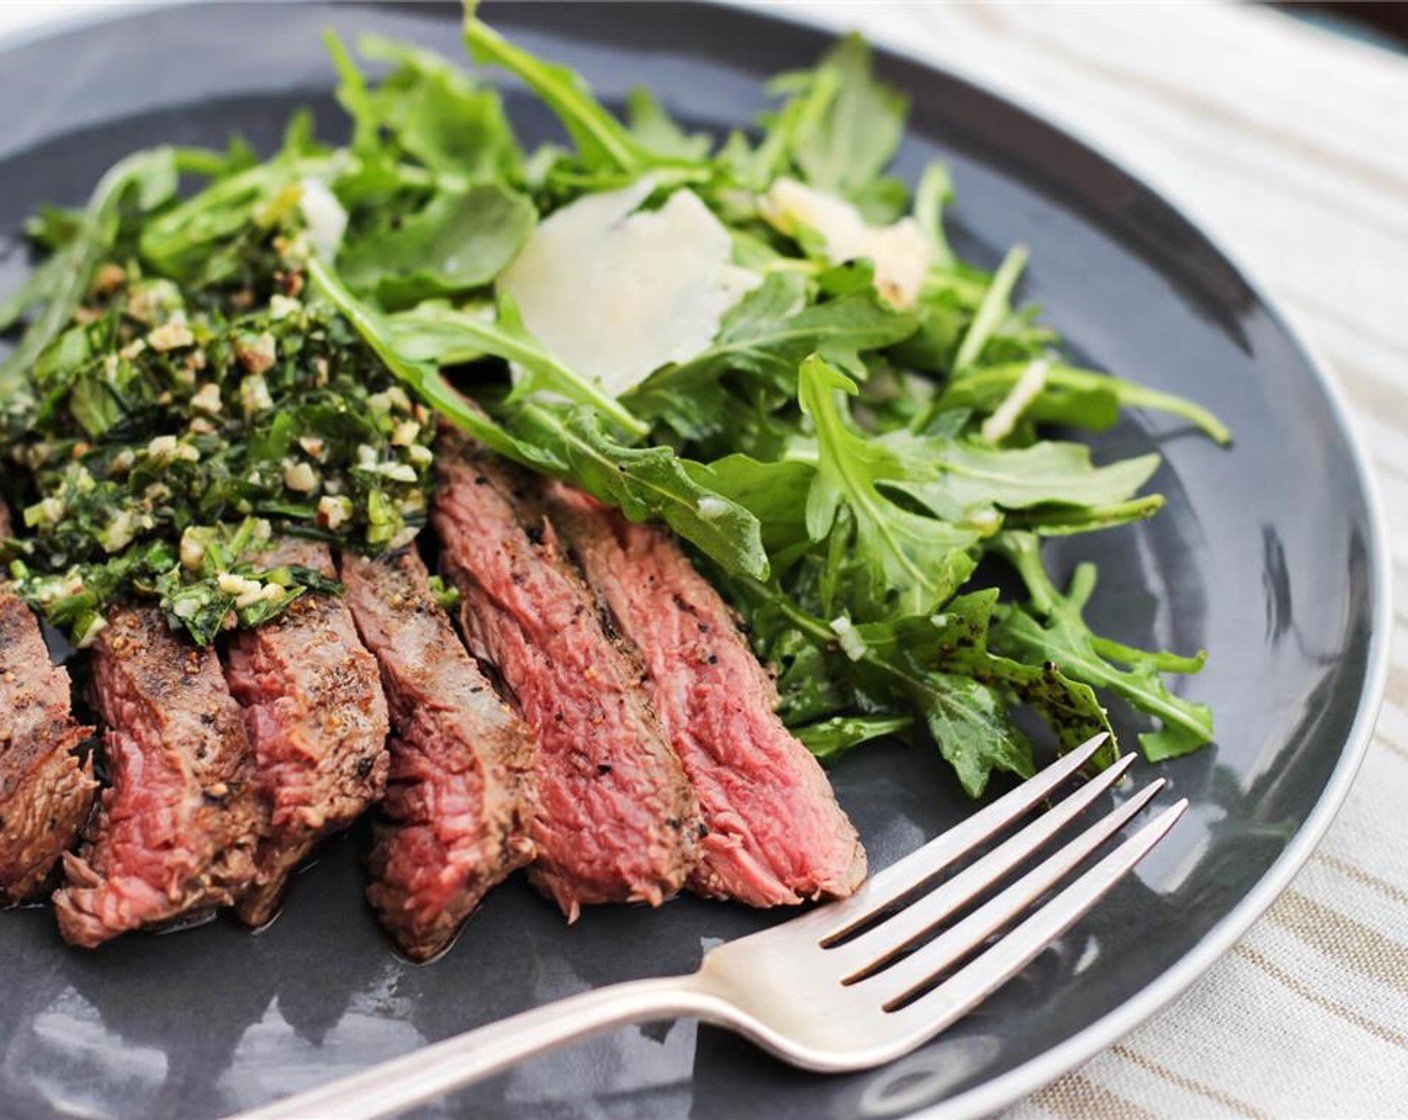 step 8 Whe the steak is done resting, slice against the grain into half-inch pieces. Serve with gremolata and arugula salad. Enjoy!